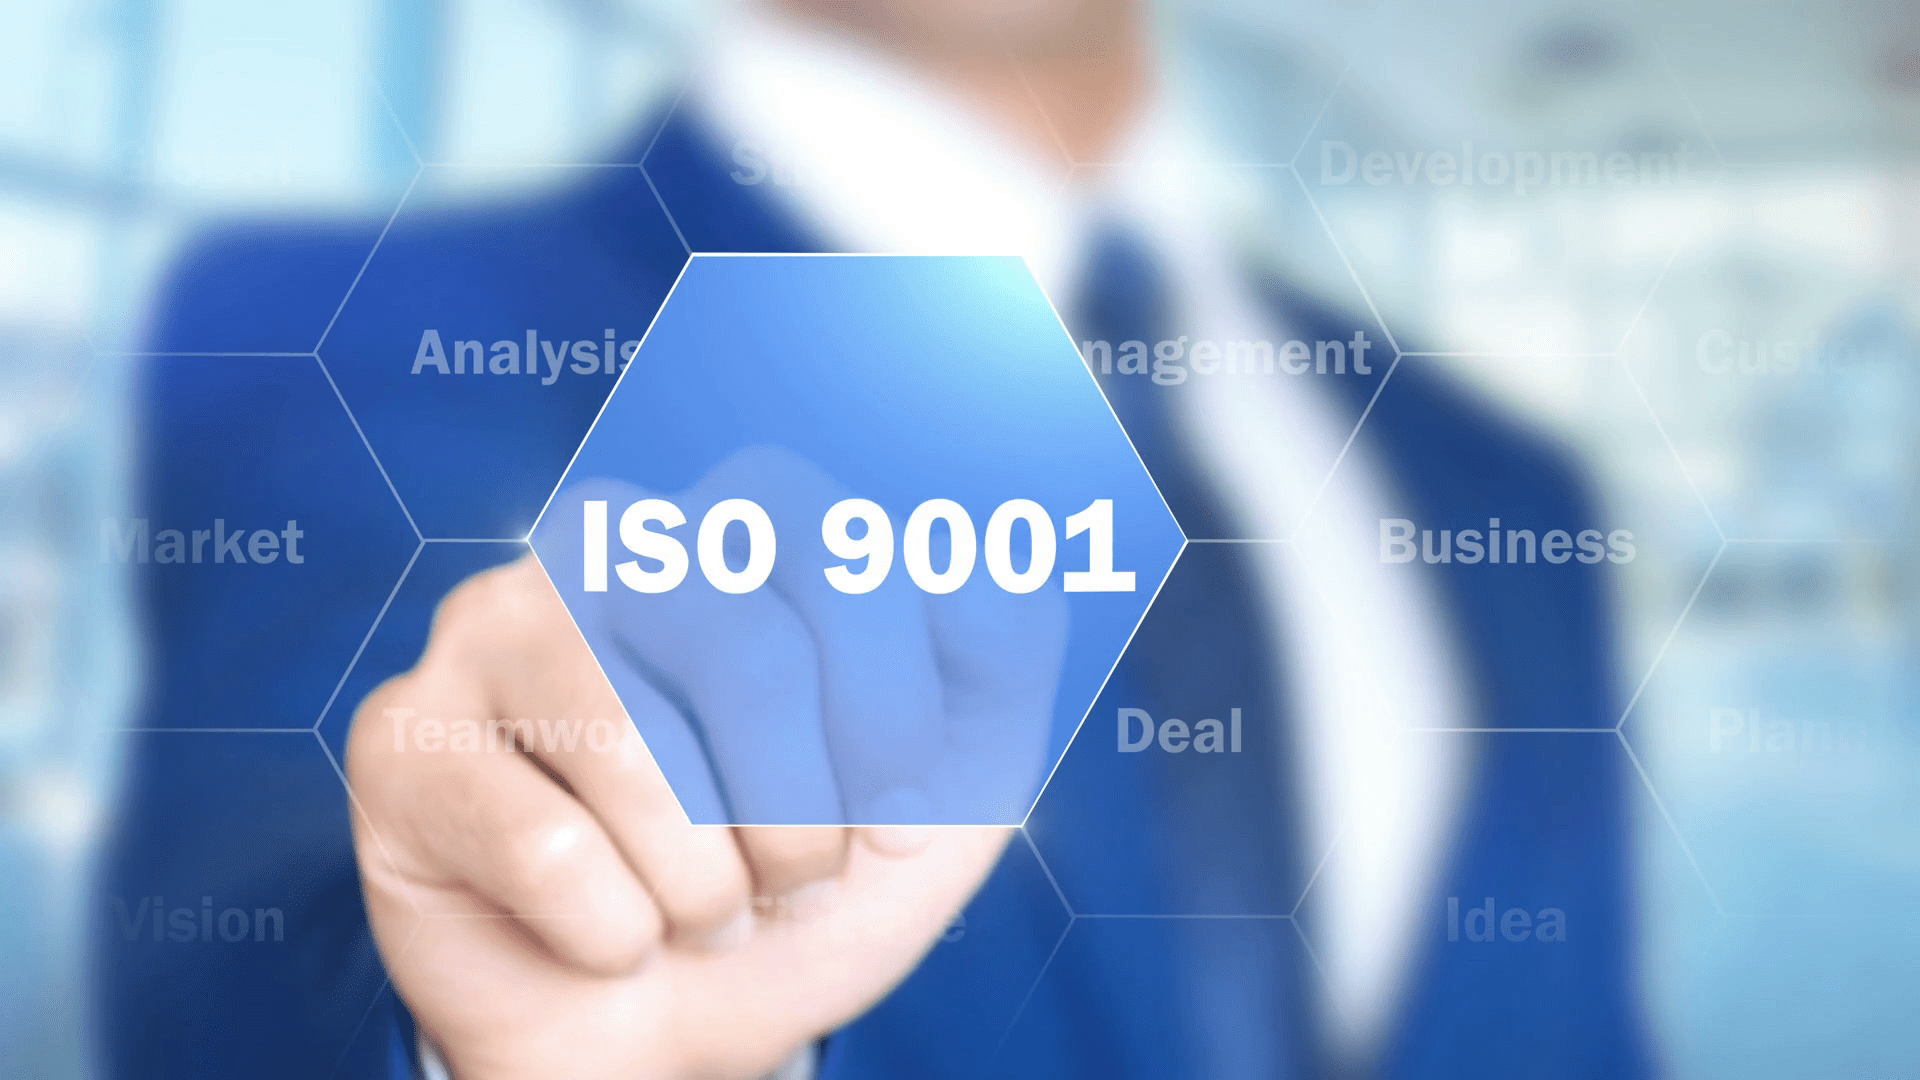 9001 ISO Certification Quality Management Service in Georgia